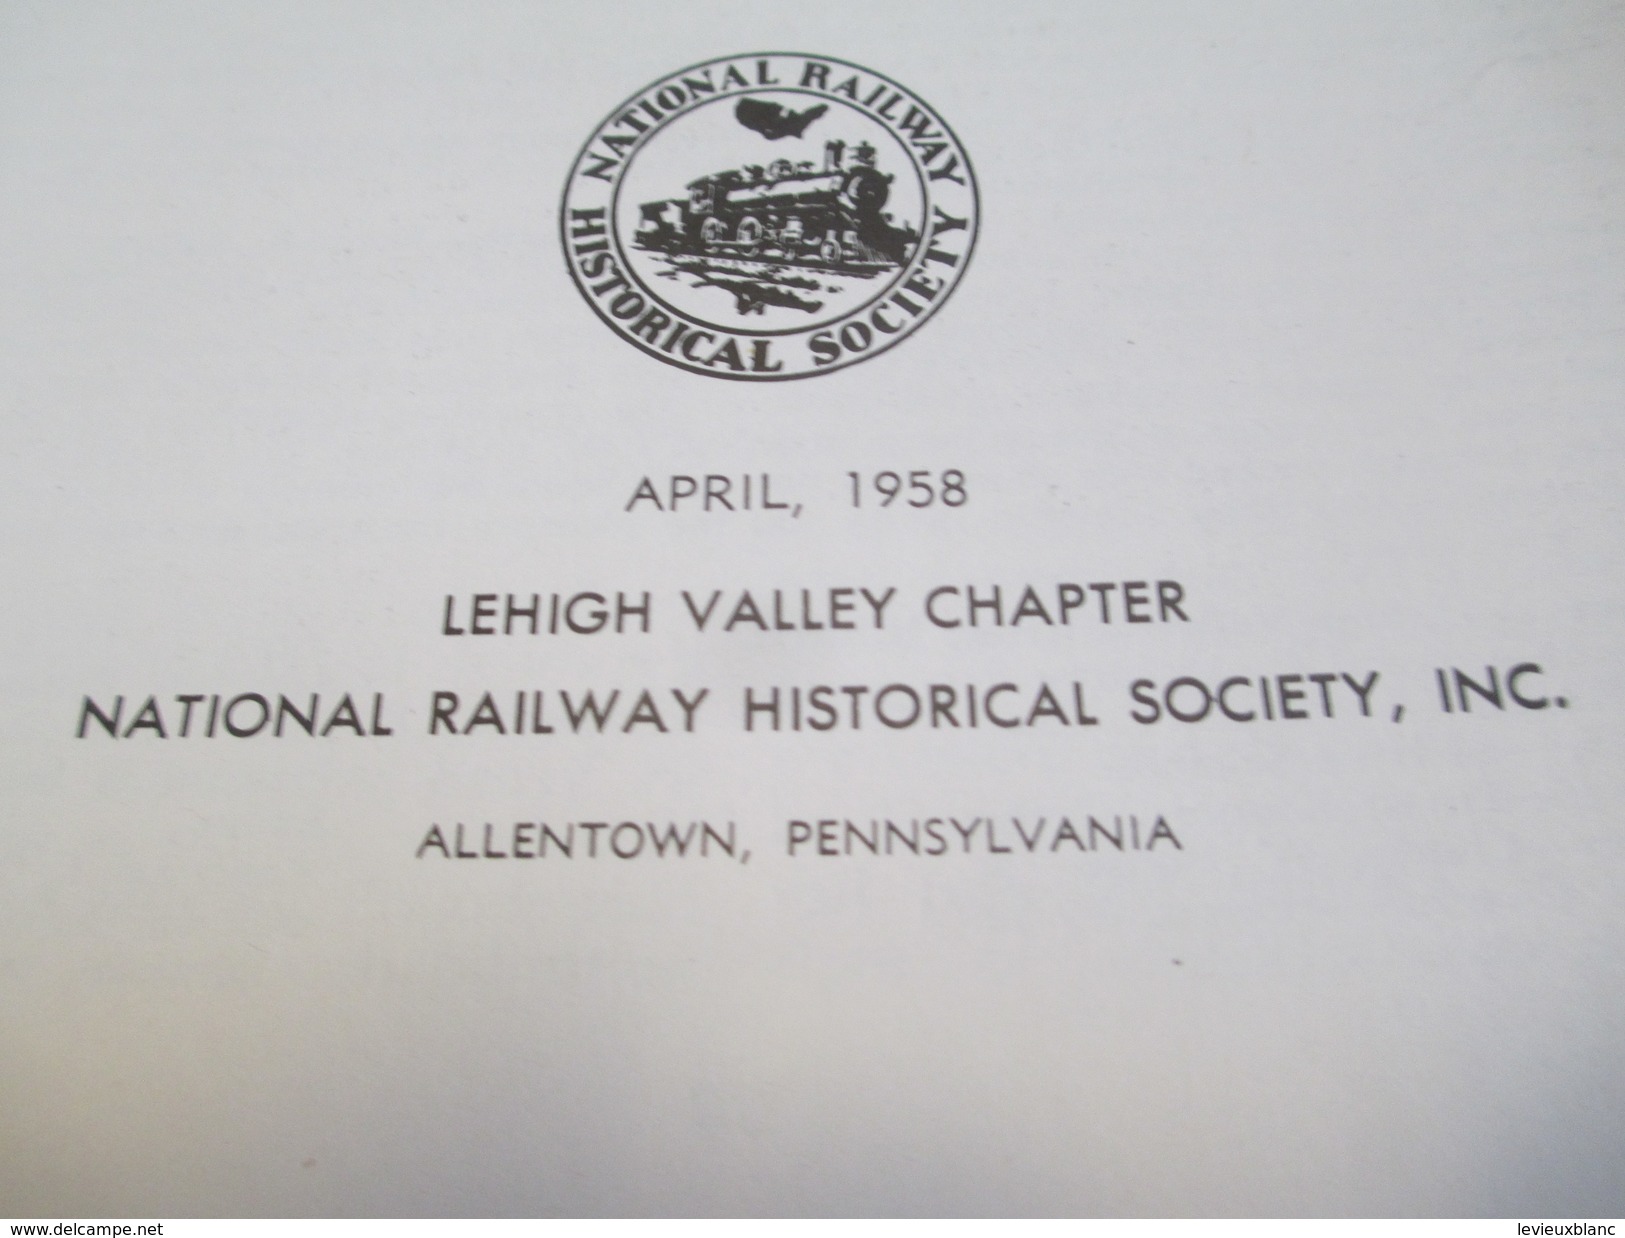 Fascicule/The Liberty Bell Route's/History &Roster/National Railway Historical Society Inc/USA/Pennsylvania/1958   TRA24 - Oorlog 1939-45